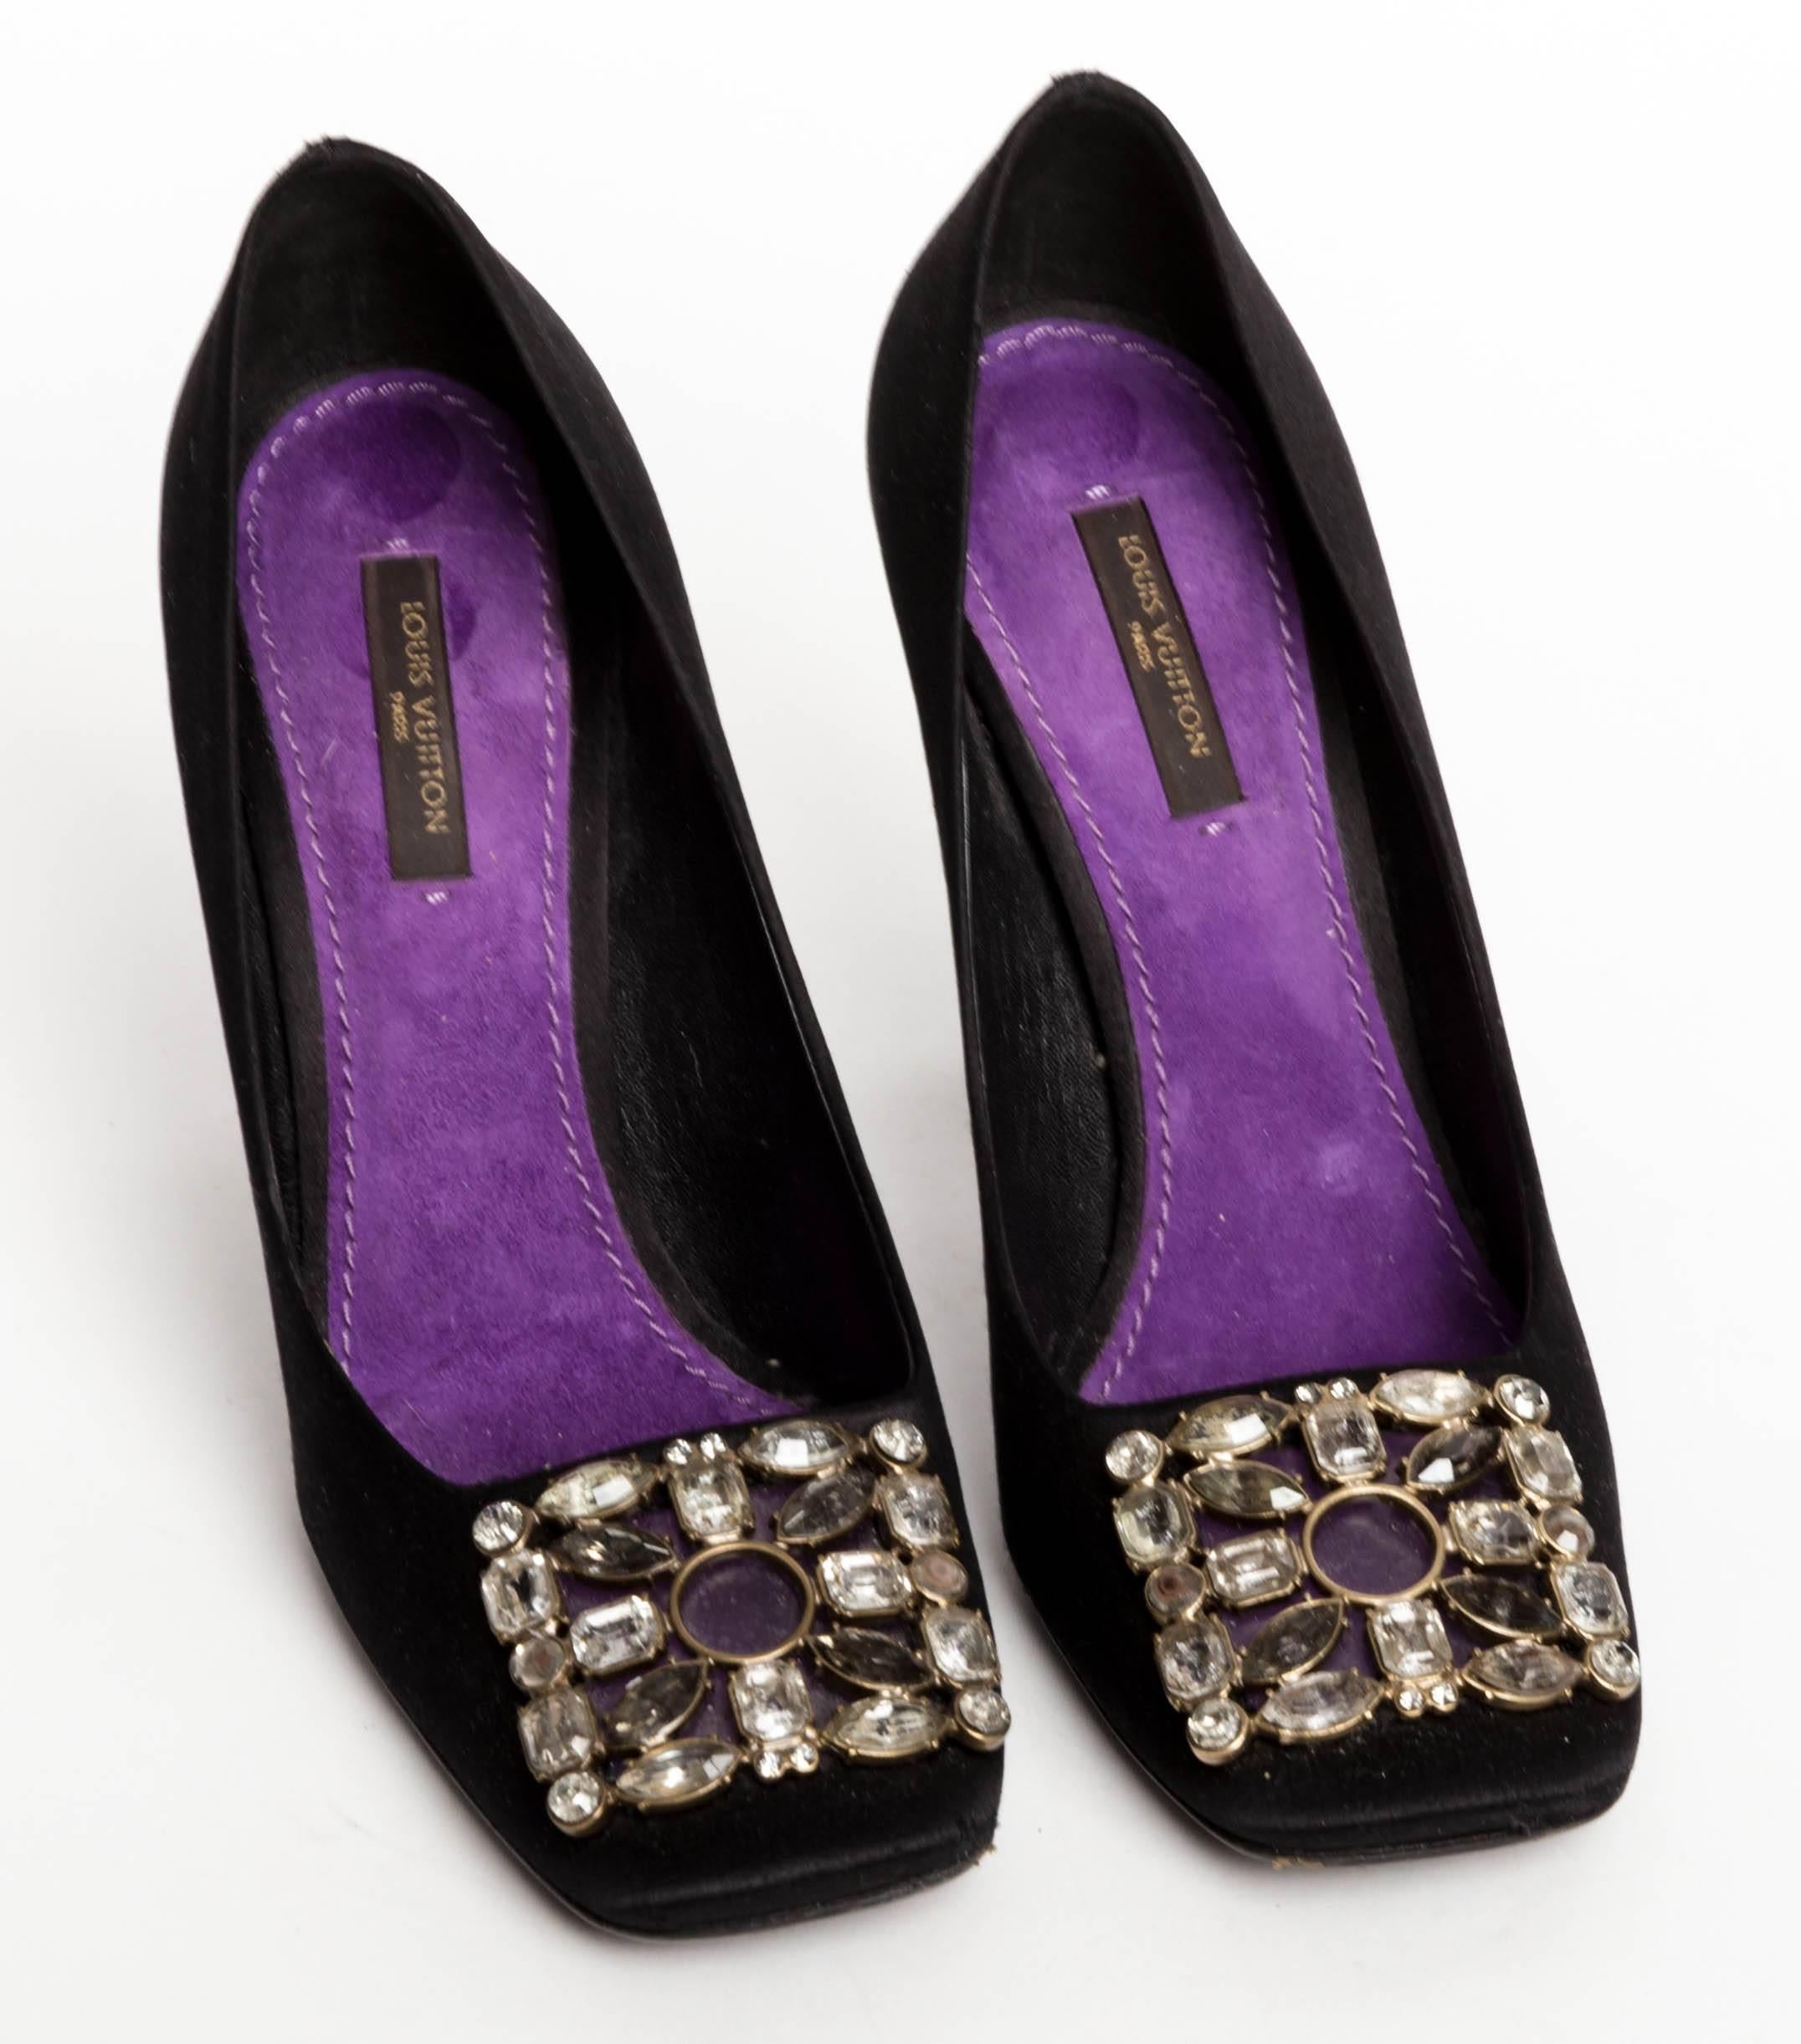 Stunning Louis Vuitton Black Silk Pumps with Jeweled Buckles - 37 1/2
Buckles consist of marquise, square and round cut crystals.
Lined in purple suede, these shoes are a work of art.